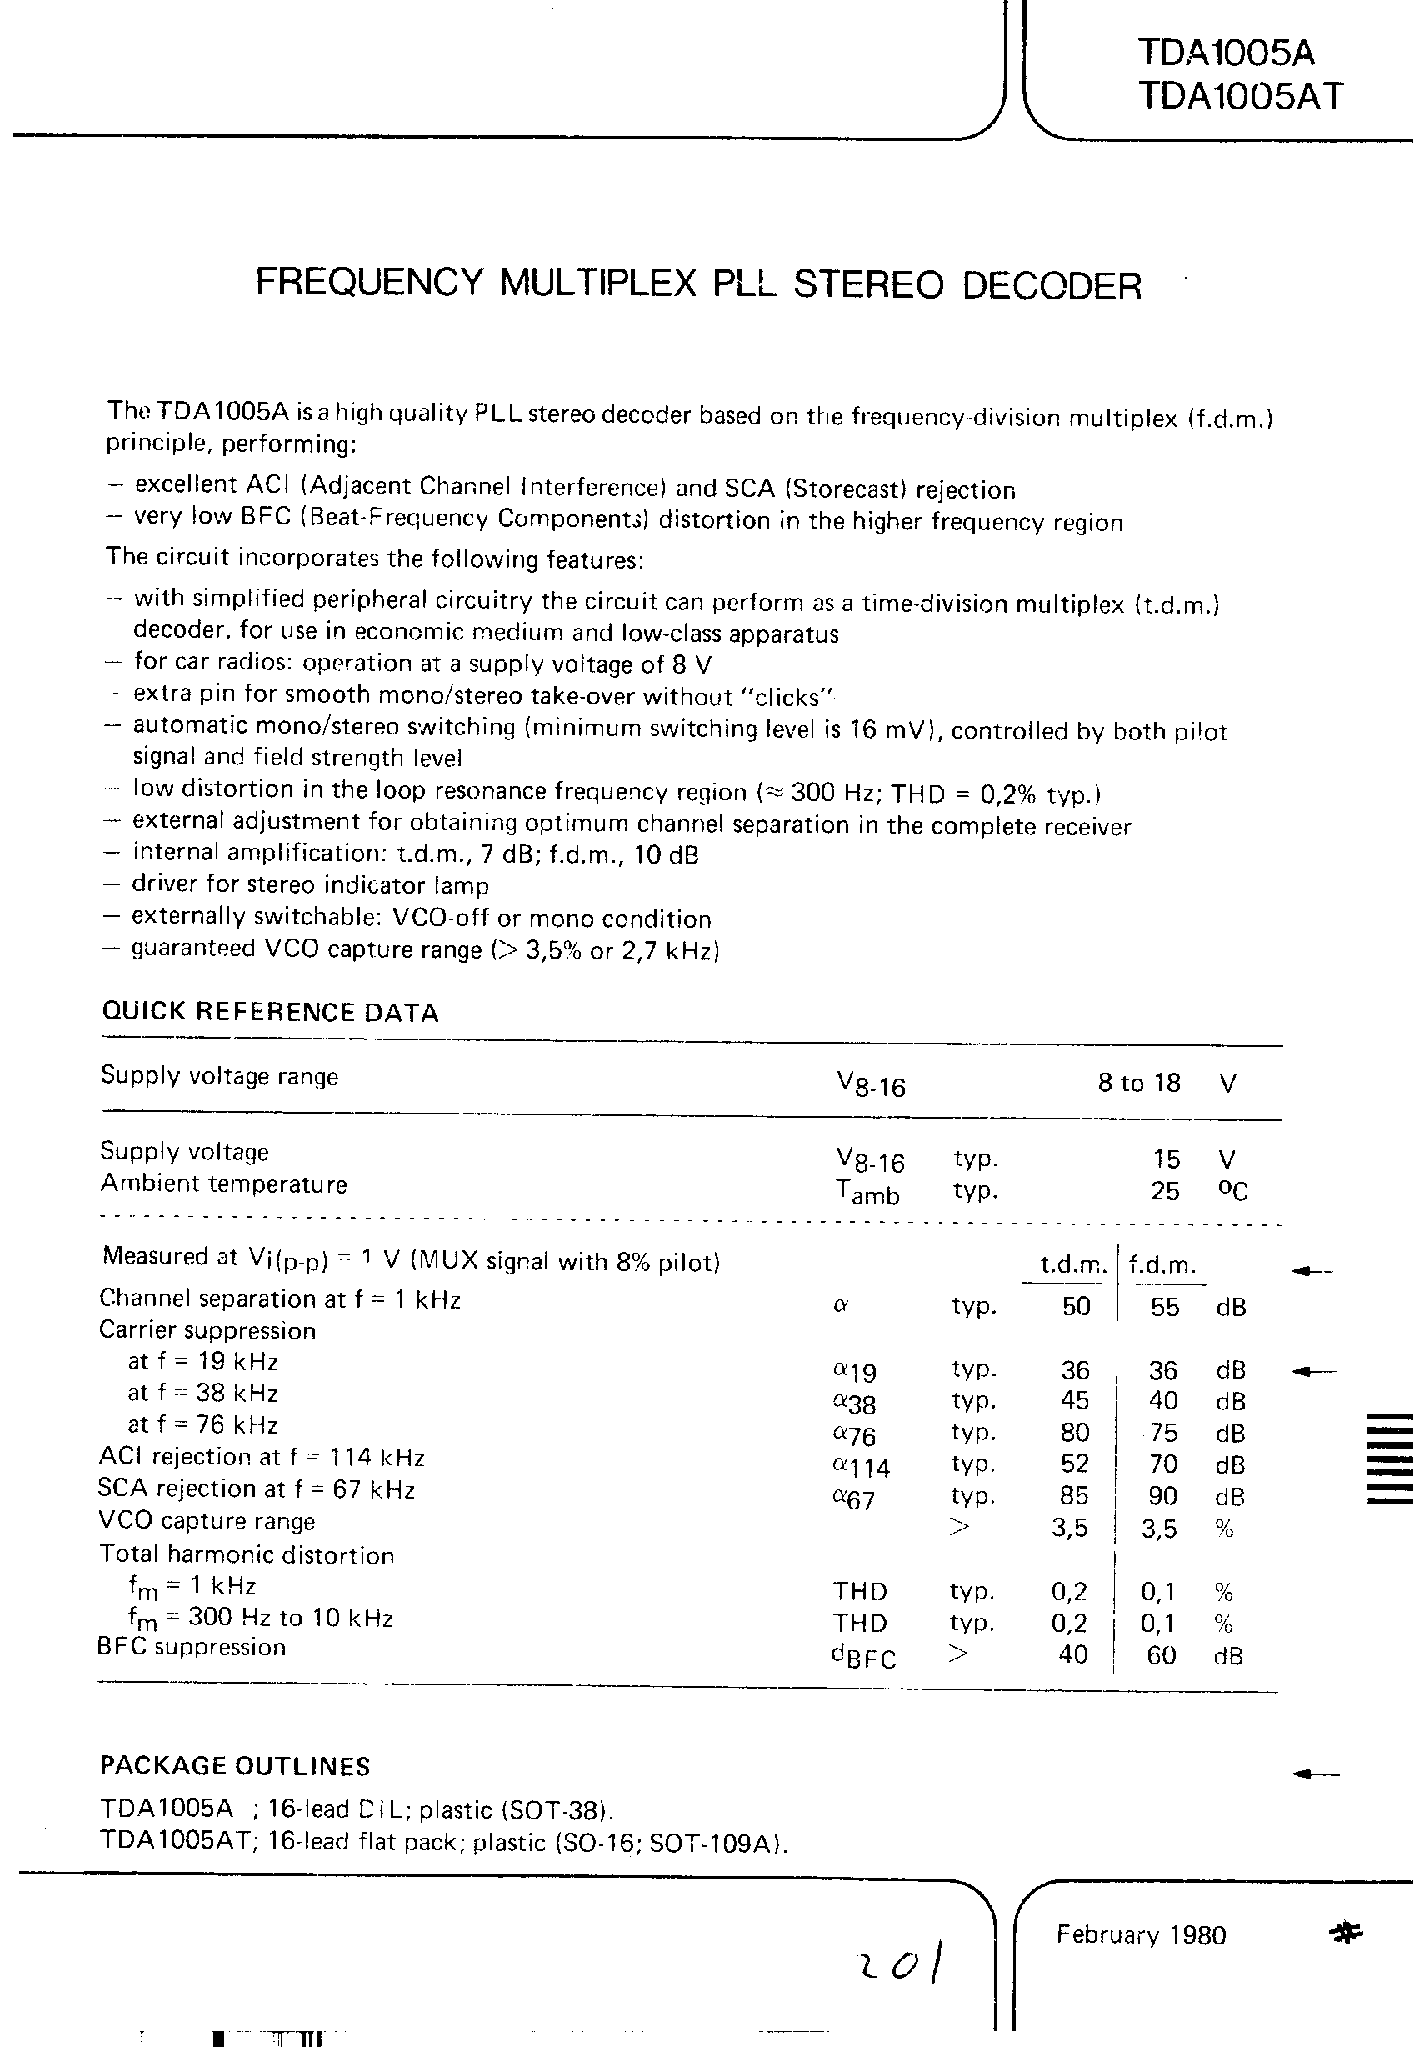 Datasheet TDA1005AT - FREQUENCY MULTIPLEX PLL STEREO DECODER page 1